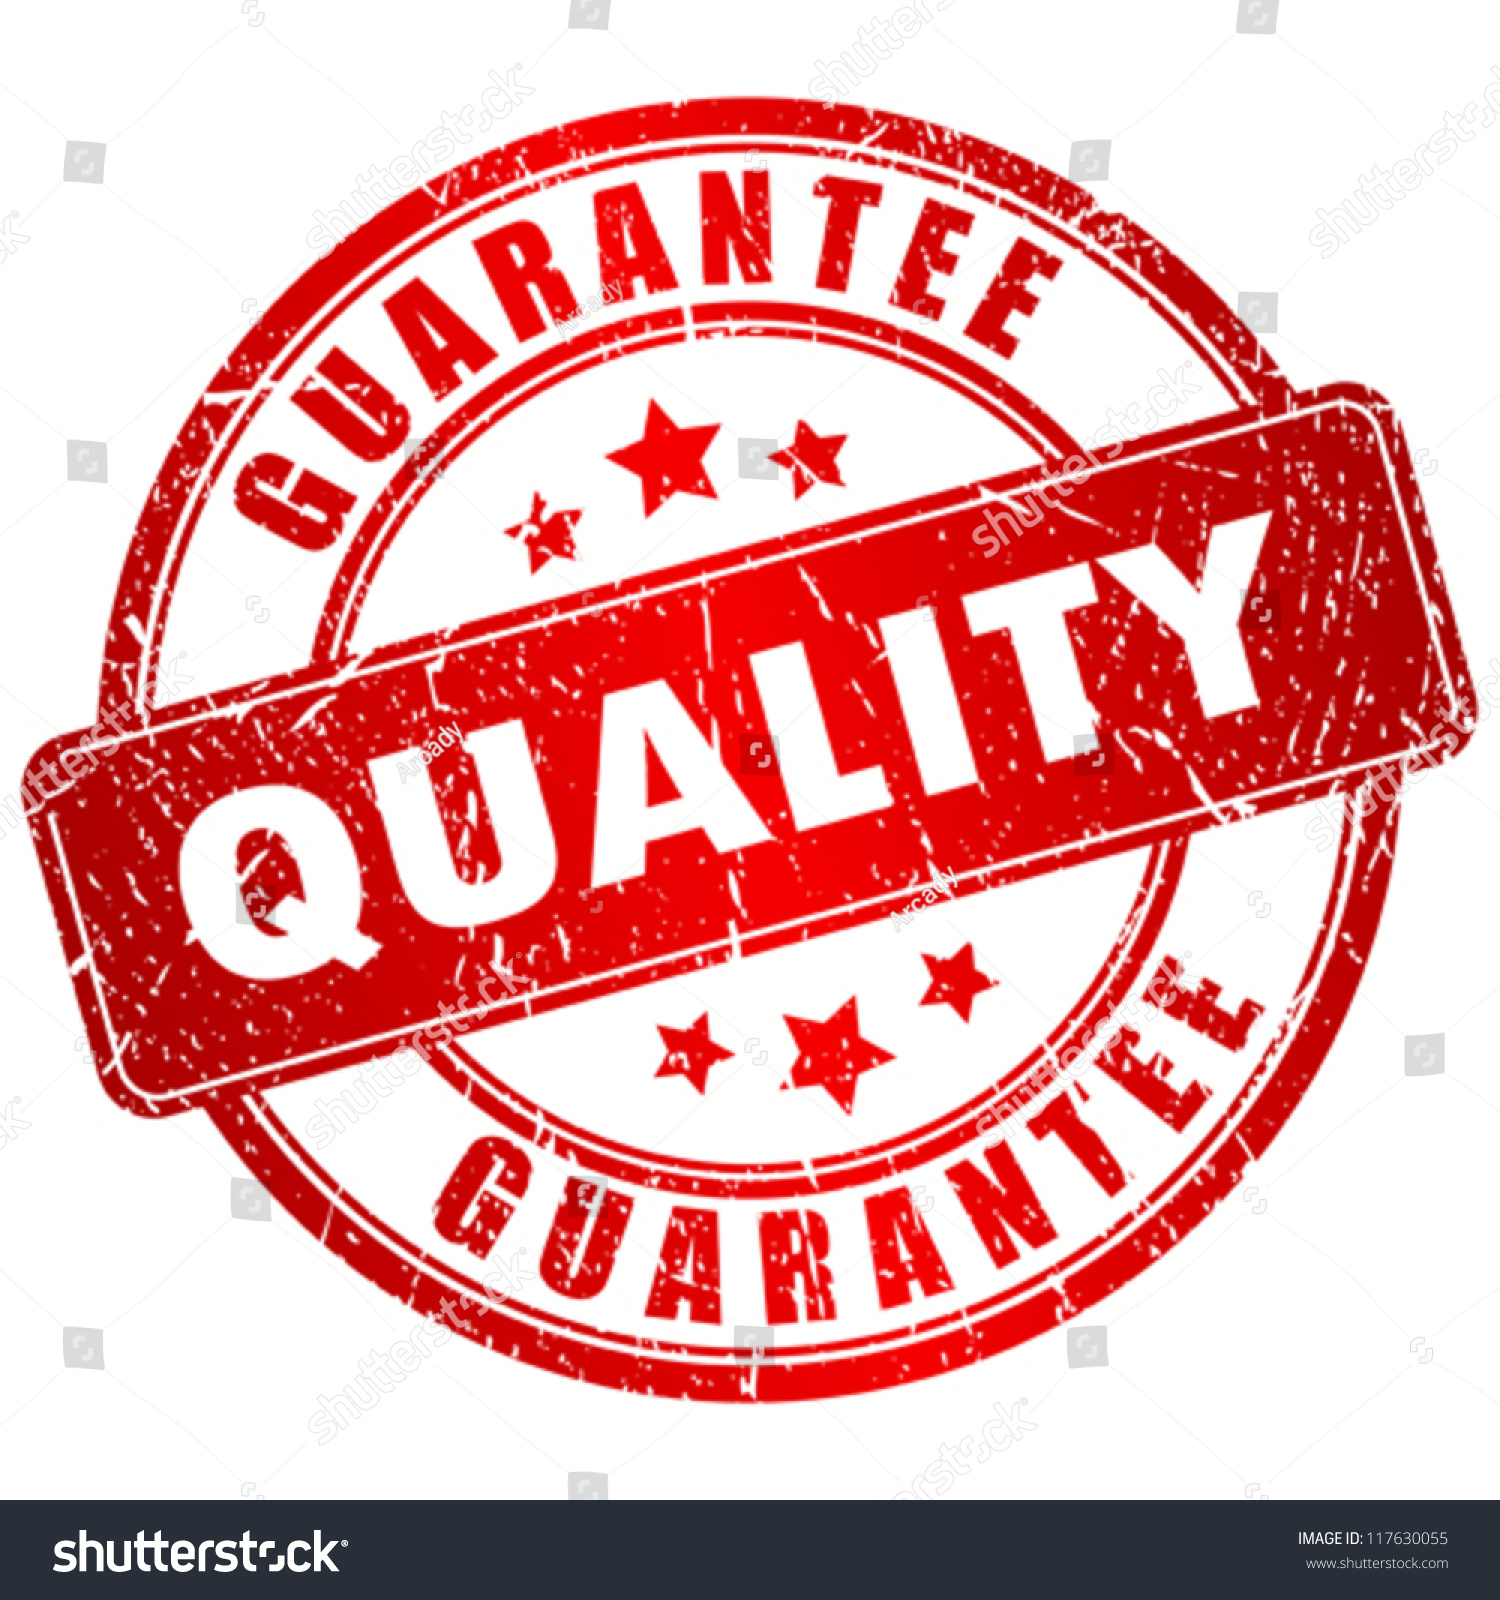 quality vector clipart - photo #26